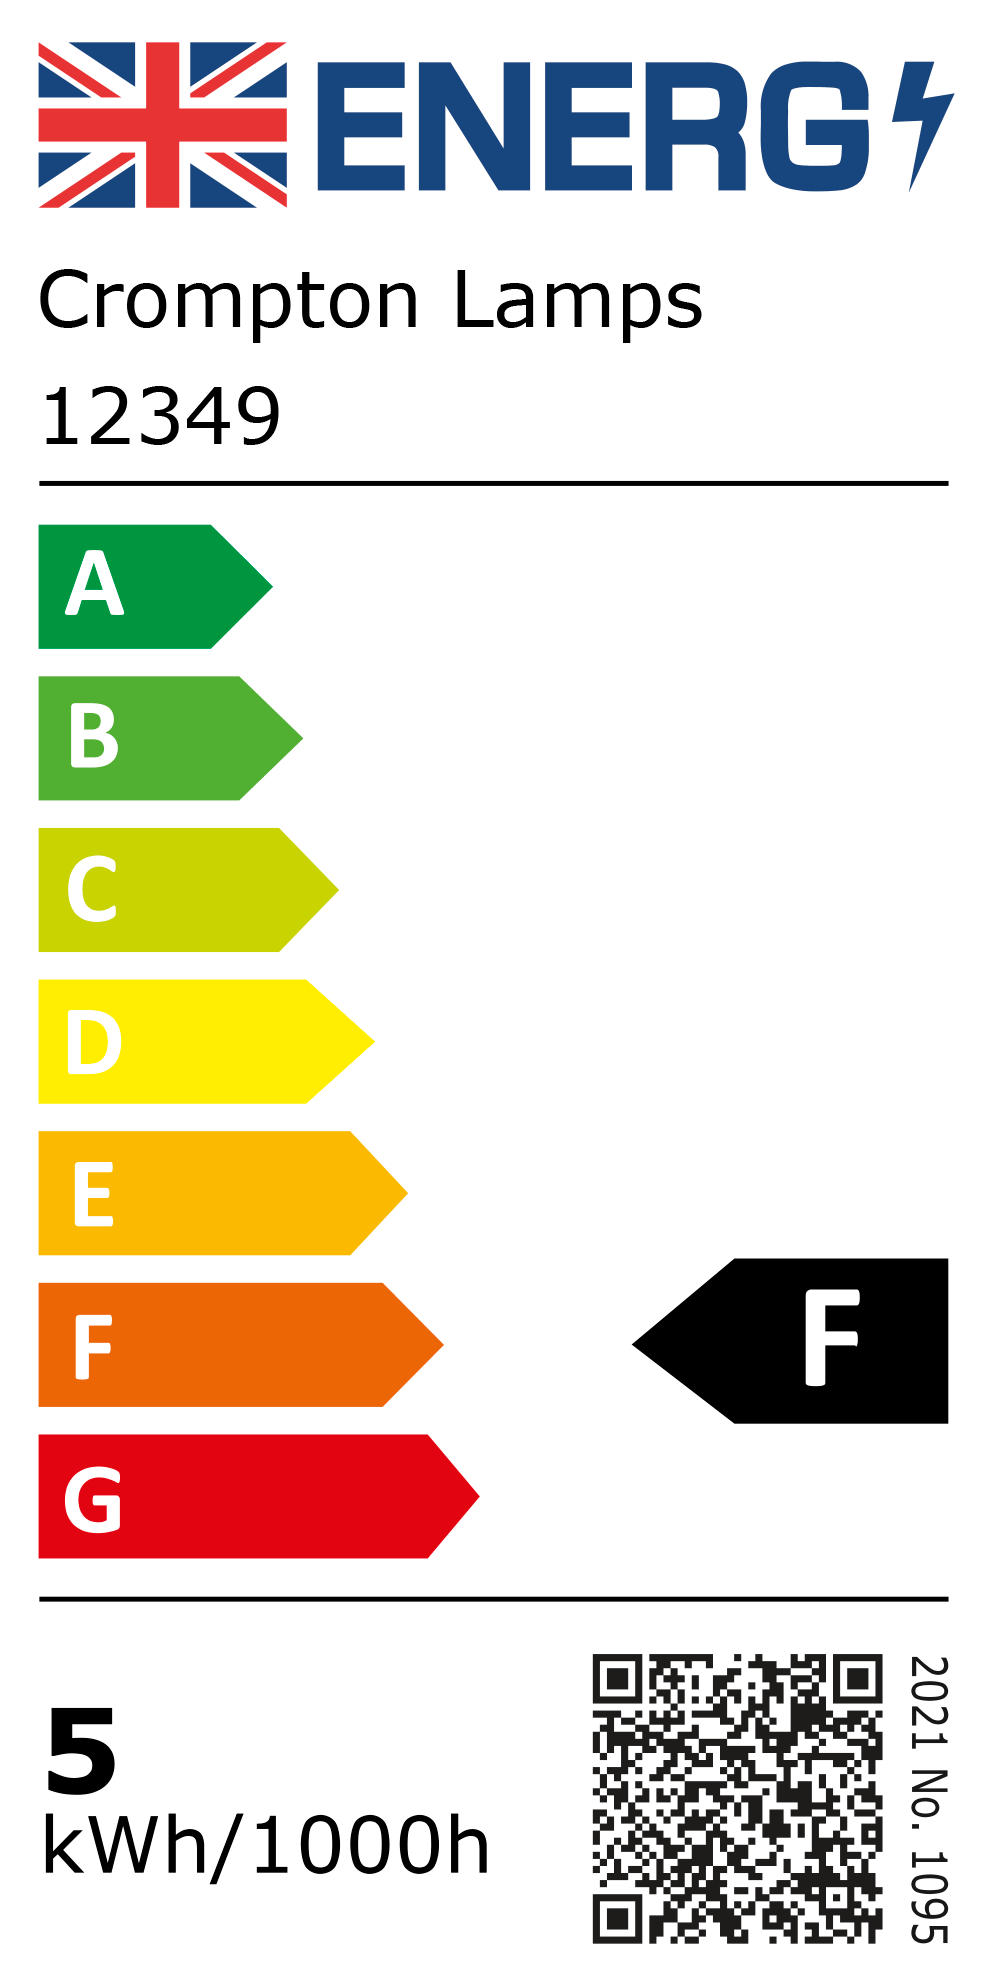 New 2021 Energy Rating Label: Stock Code 12349